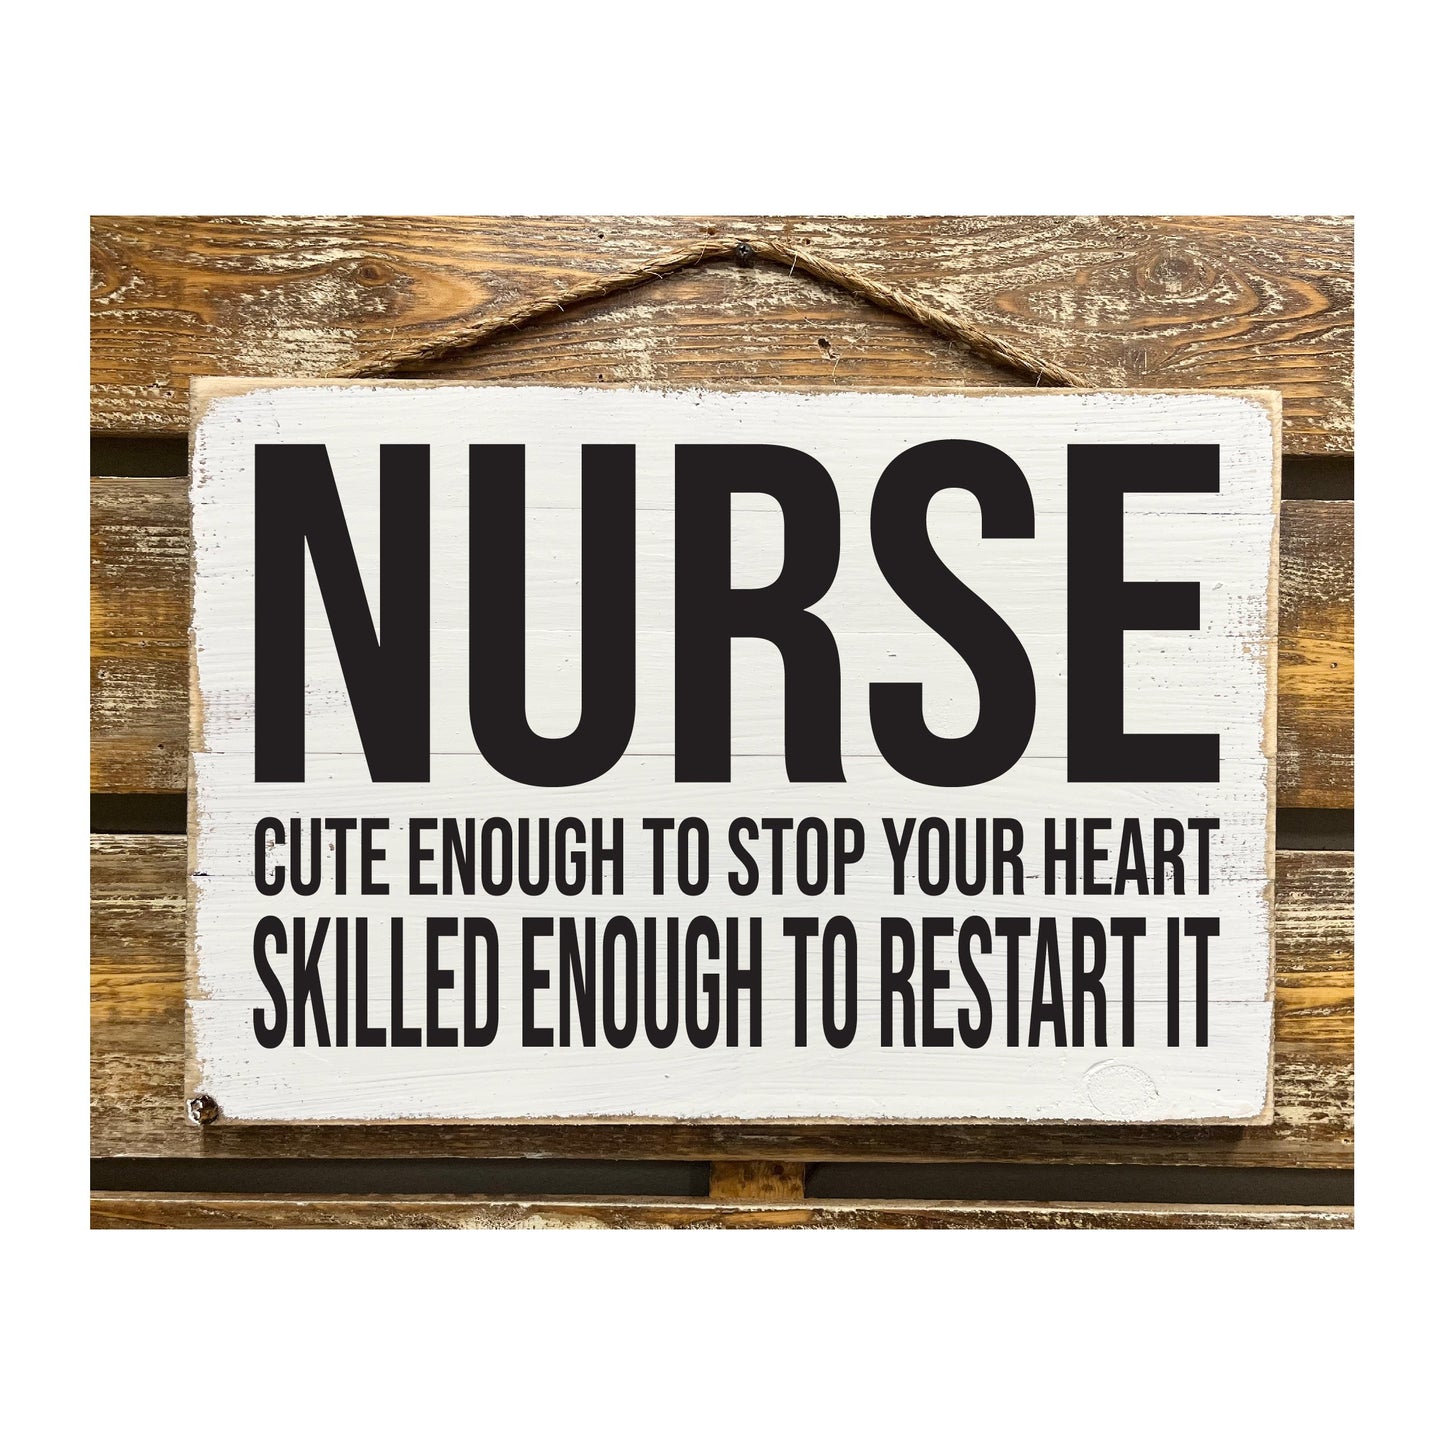 Nurse Cute Enough To Stop Your Heart Skilled Enough To Restart It